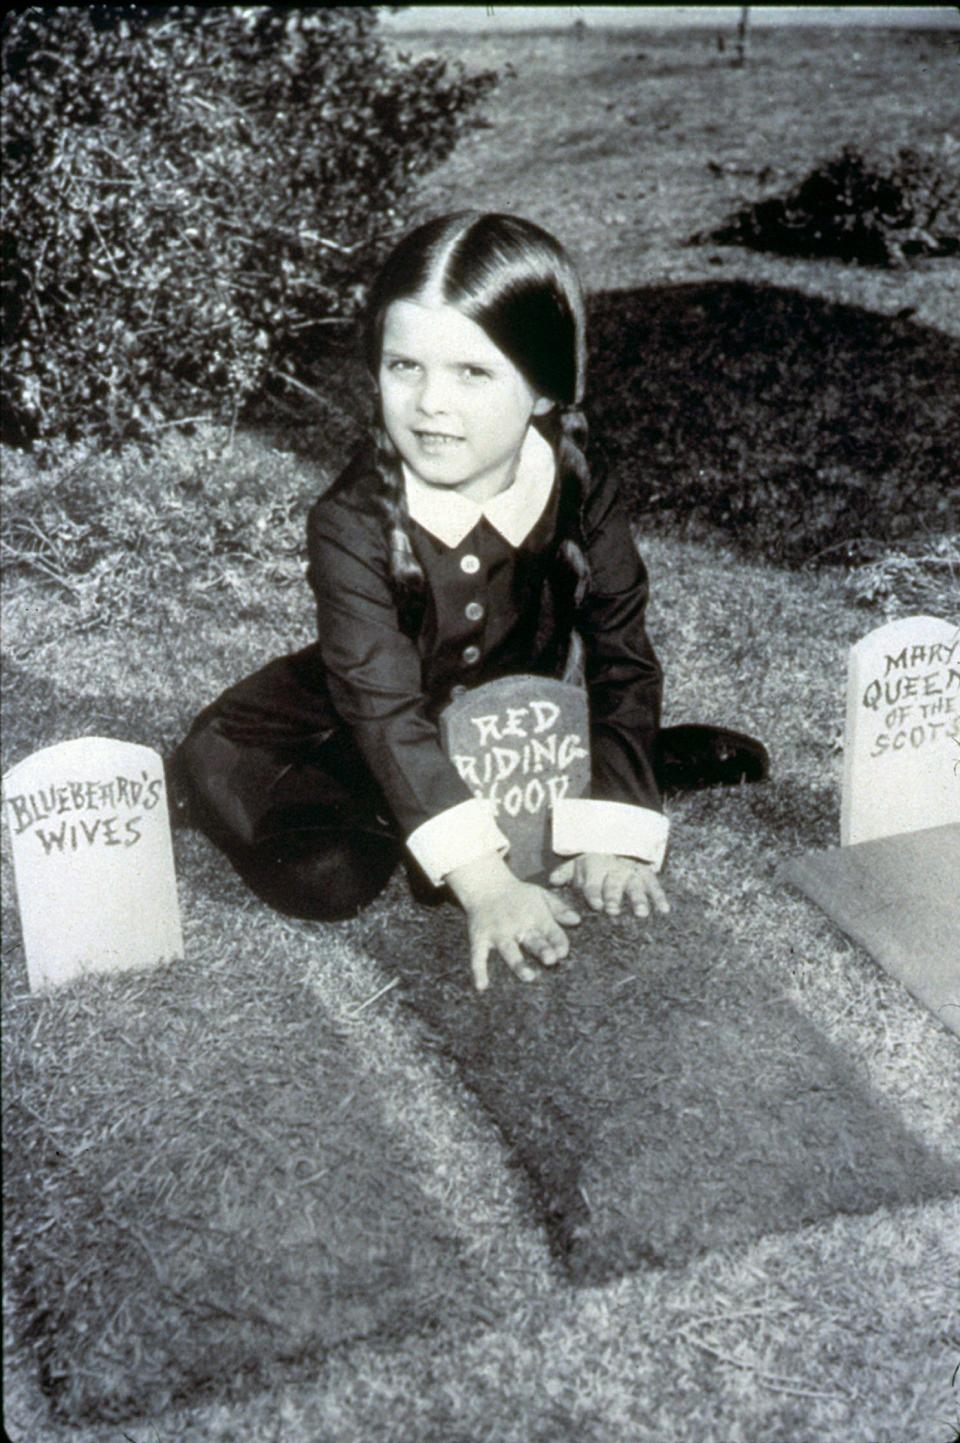 -Lisa Loring, in "The Addams Family" Wednesday Addams plays in the backyard of her home on 000 Cemeterey Ridge. Wednesday is just one off the many unusual family members in the "The Addams Family."